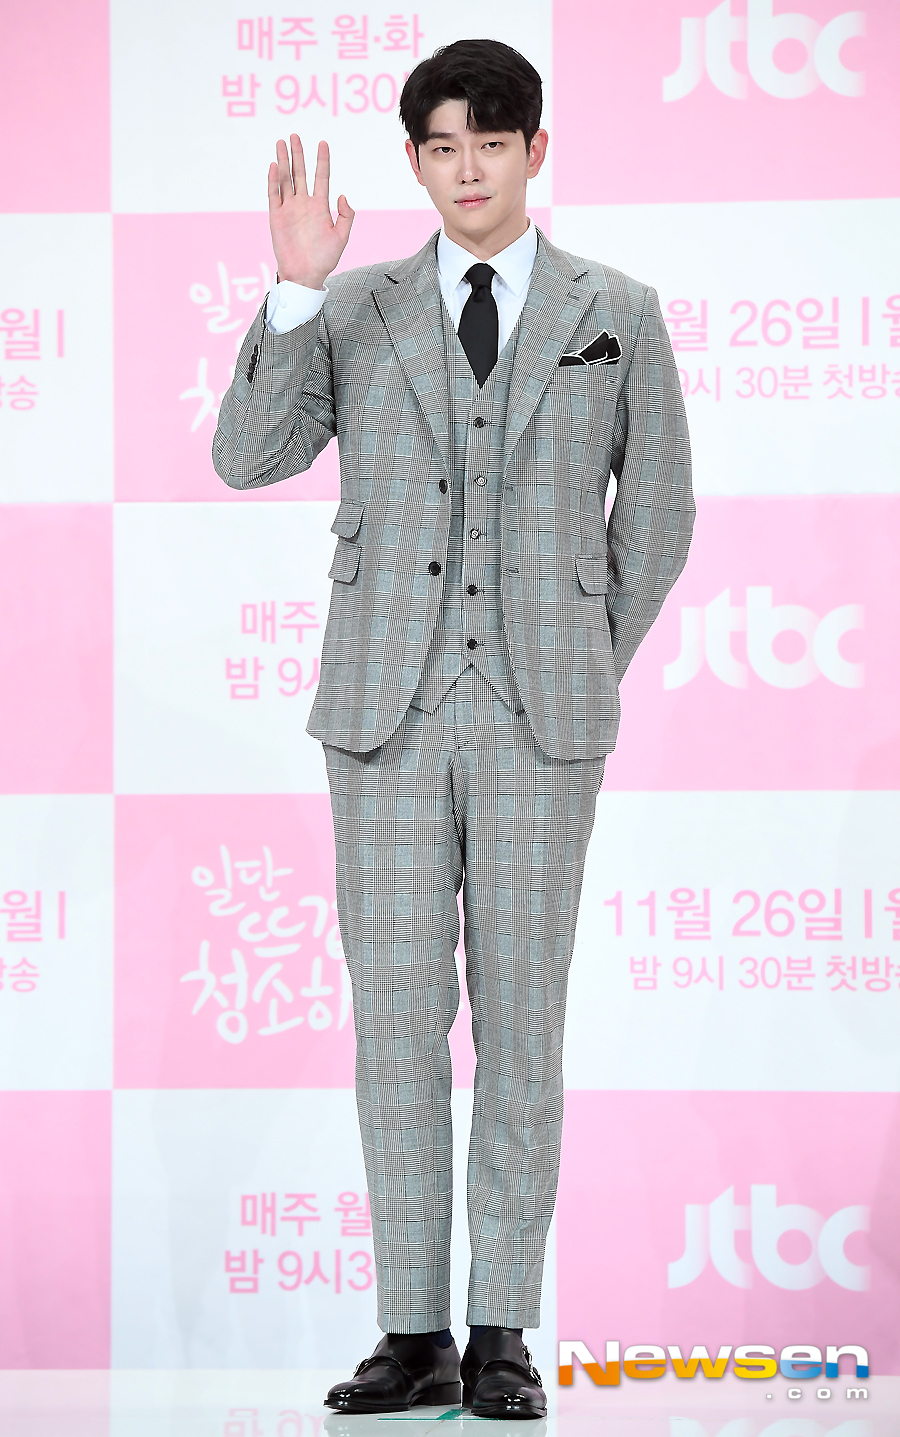 <p>JTBCs new Monday-Tuesday tale drama once hot, clean(pole for hee/rendering nodes final) production presentation 11 26, 2pm at Seoul Yeongdeungpo-GU Yeongdeungpo Times Square Juamorris Stewart Convention in progress.</p><p>This day, Yoon Kyun-sang this pose.</p><p>Yoon Kyun-sang, Kim Yoo-jung, Song Jae-Rim, Kim Min-kyu, student, car, etc starring once hot, clean theclean life more important than Hotties cleaning companies CEO joists(Yoon Kyun-sang)and cleanliness than your survival first passionate gardeners to take the standard way of life. Sol(Kim Yoo-jung)In this meet and expand the ‘sterile then’ healing romance.</p>